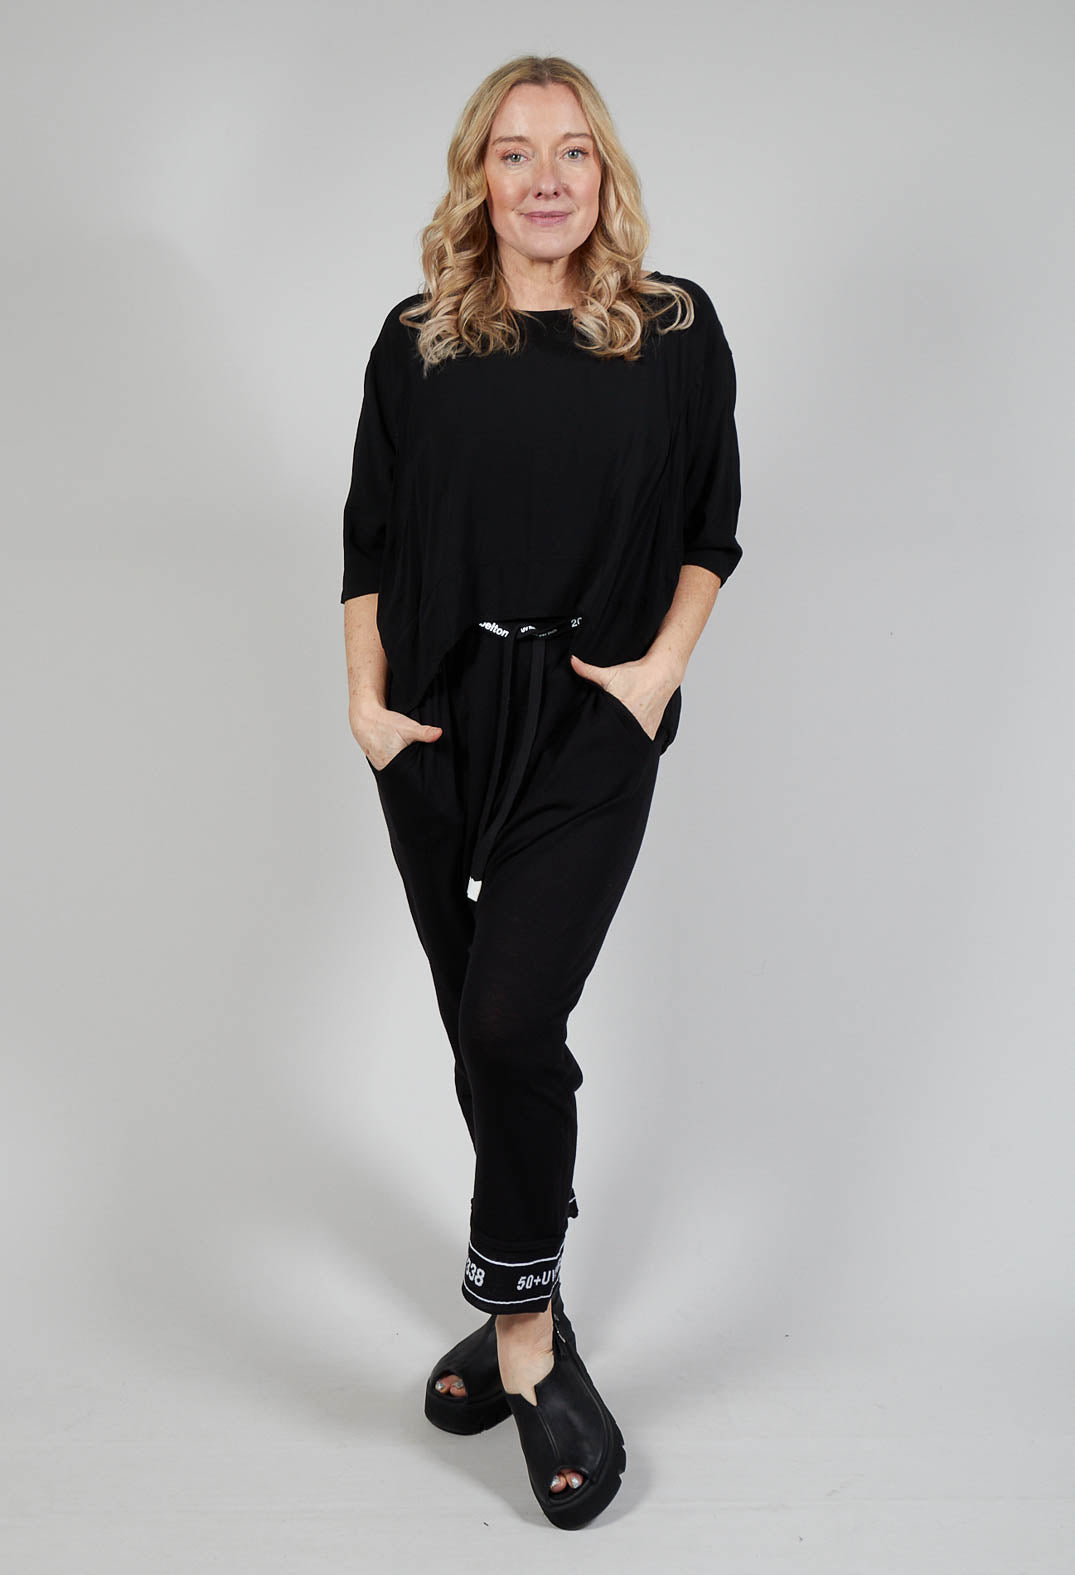 Relaxed Fit Jersey Top in Black